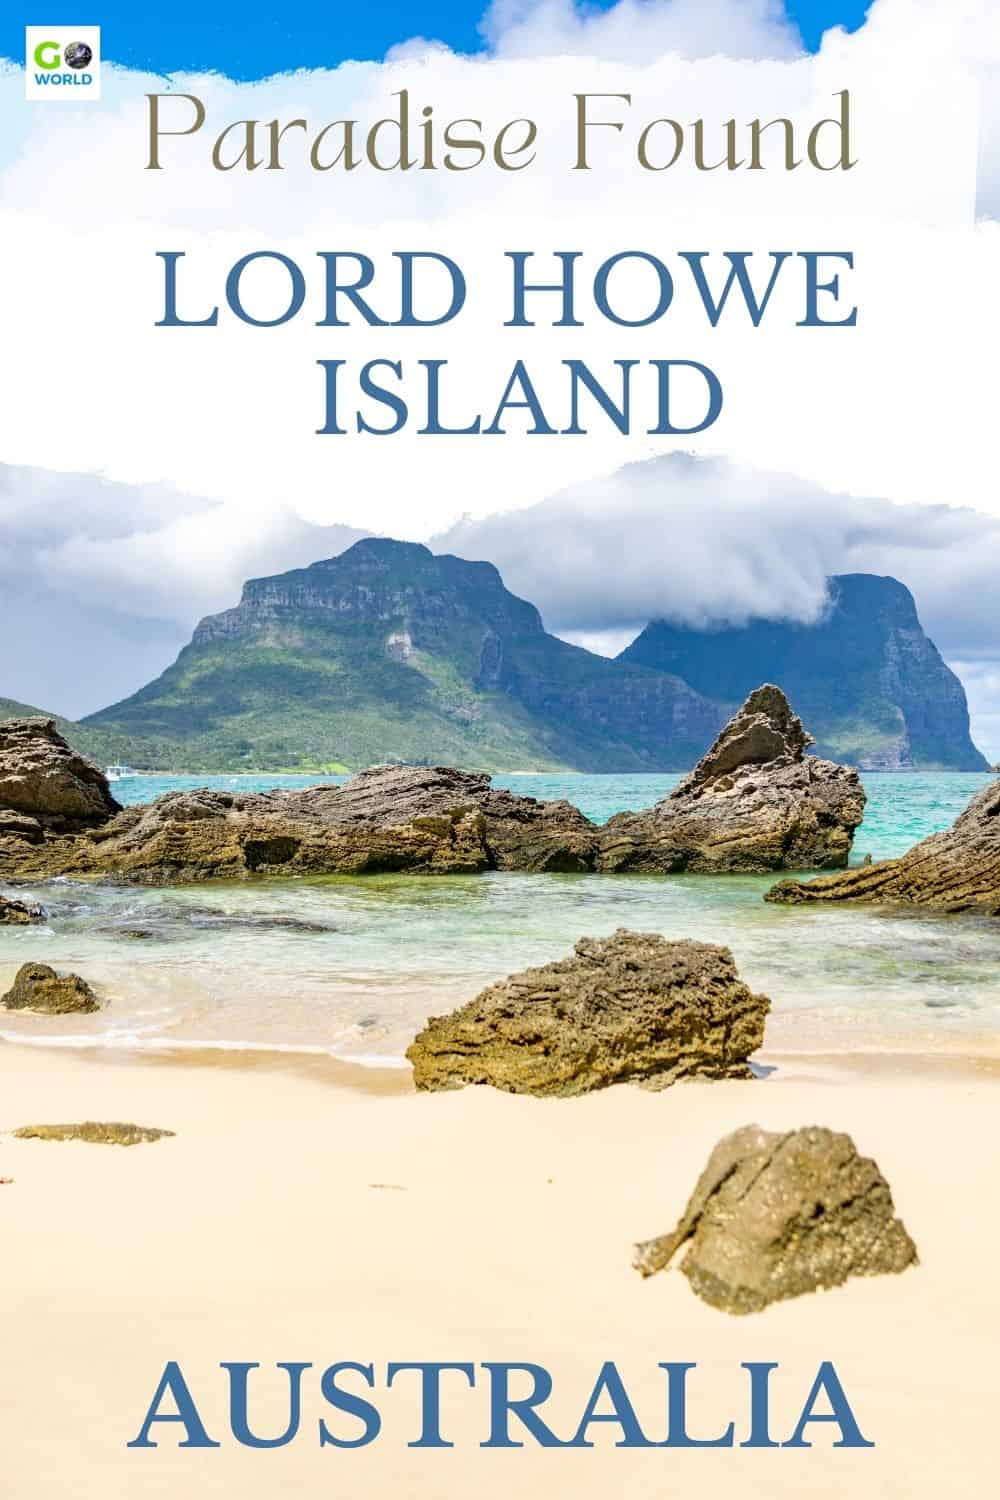 Lord Howe Island is a small piece of paradise with pristine beaches, stunning views, unique birdlife and a coral reef teeming with sea life. #Australia #IslandsinAustralia